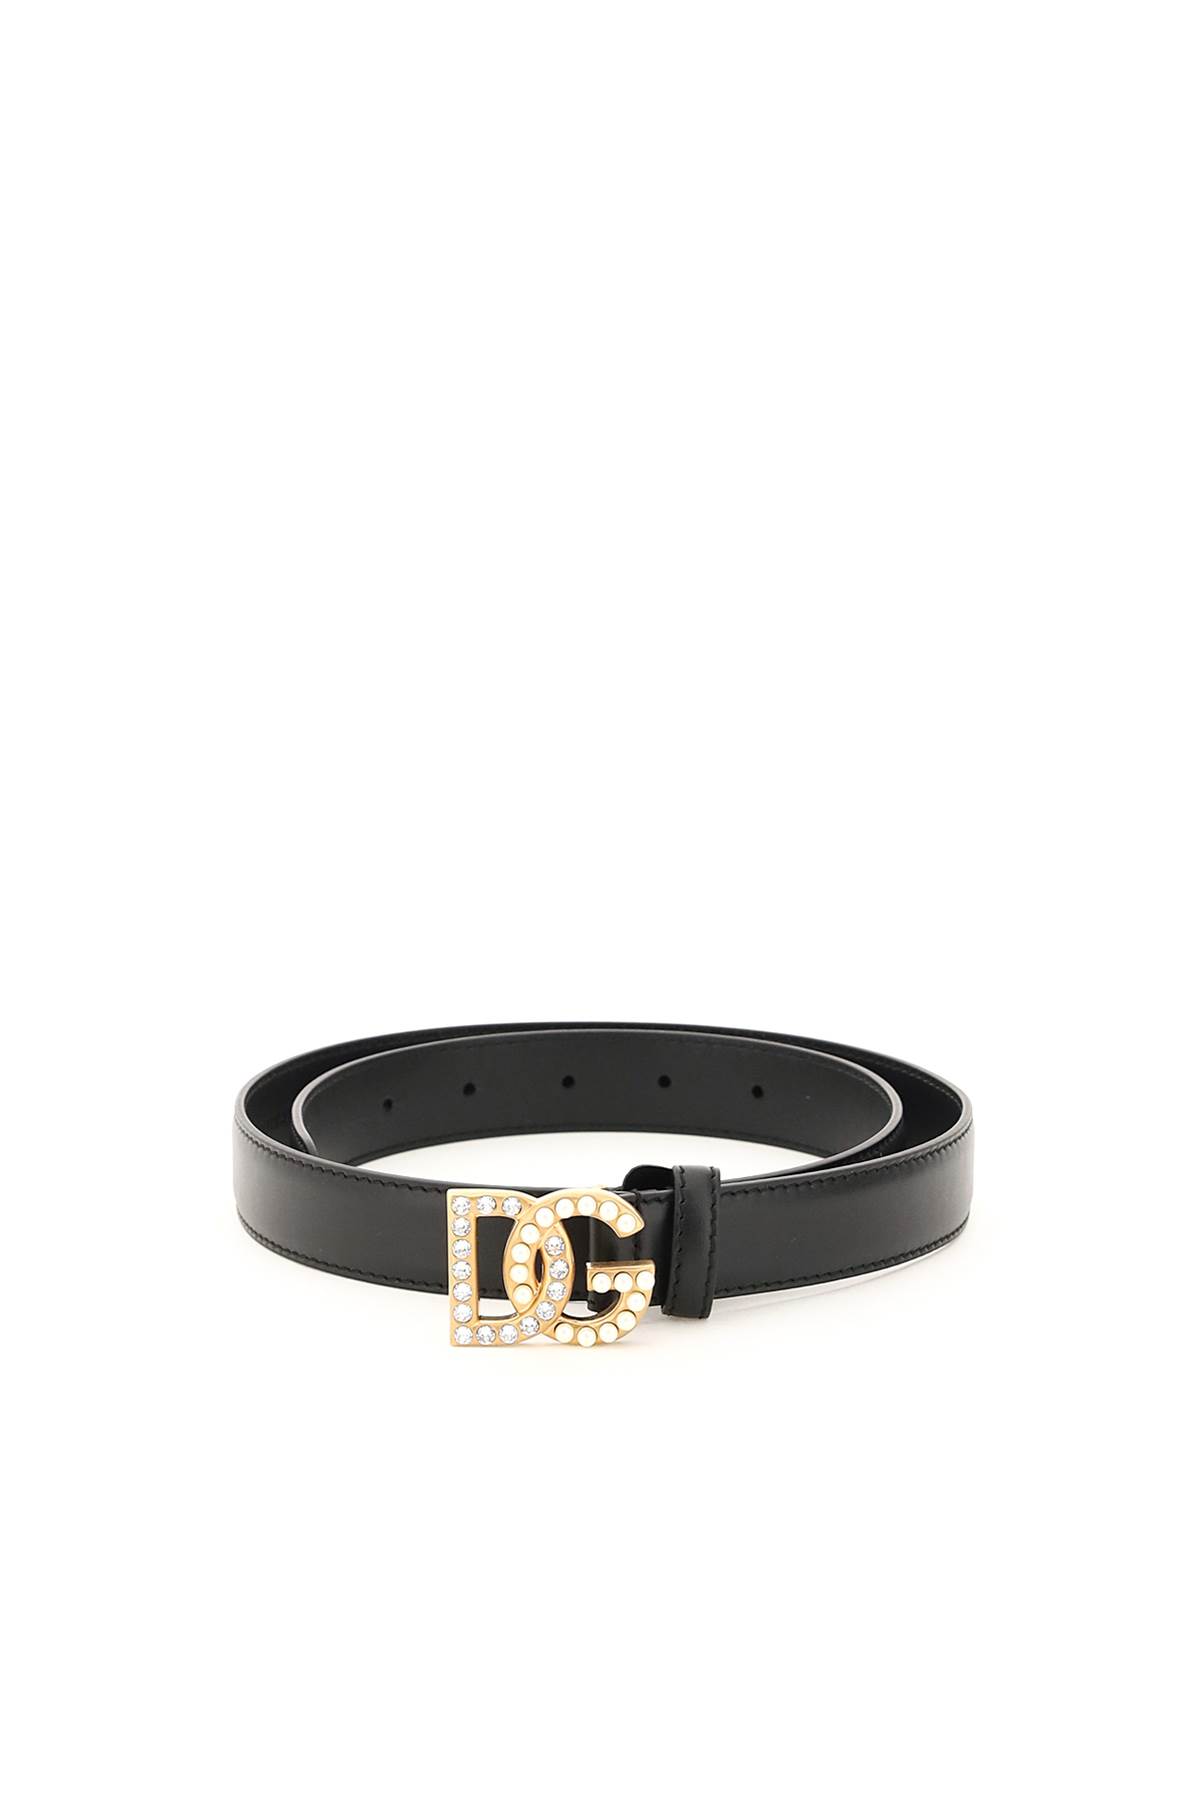 Dolce & Gabbana Dg Logo Belt With Pearls And Crystals